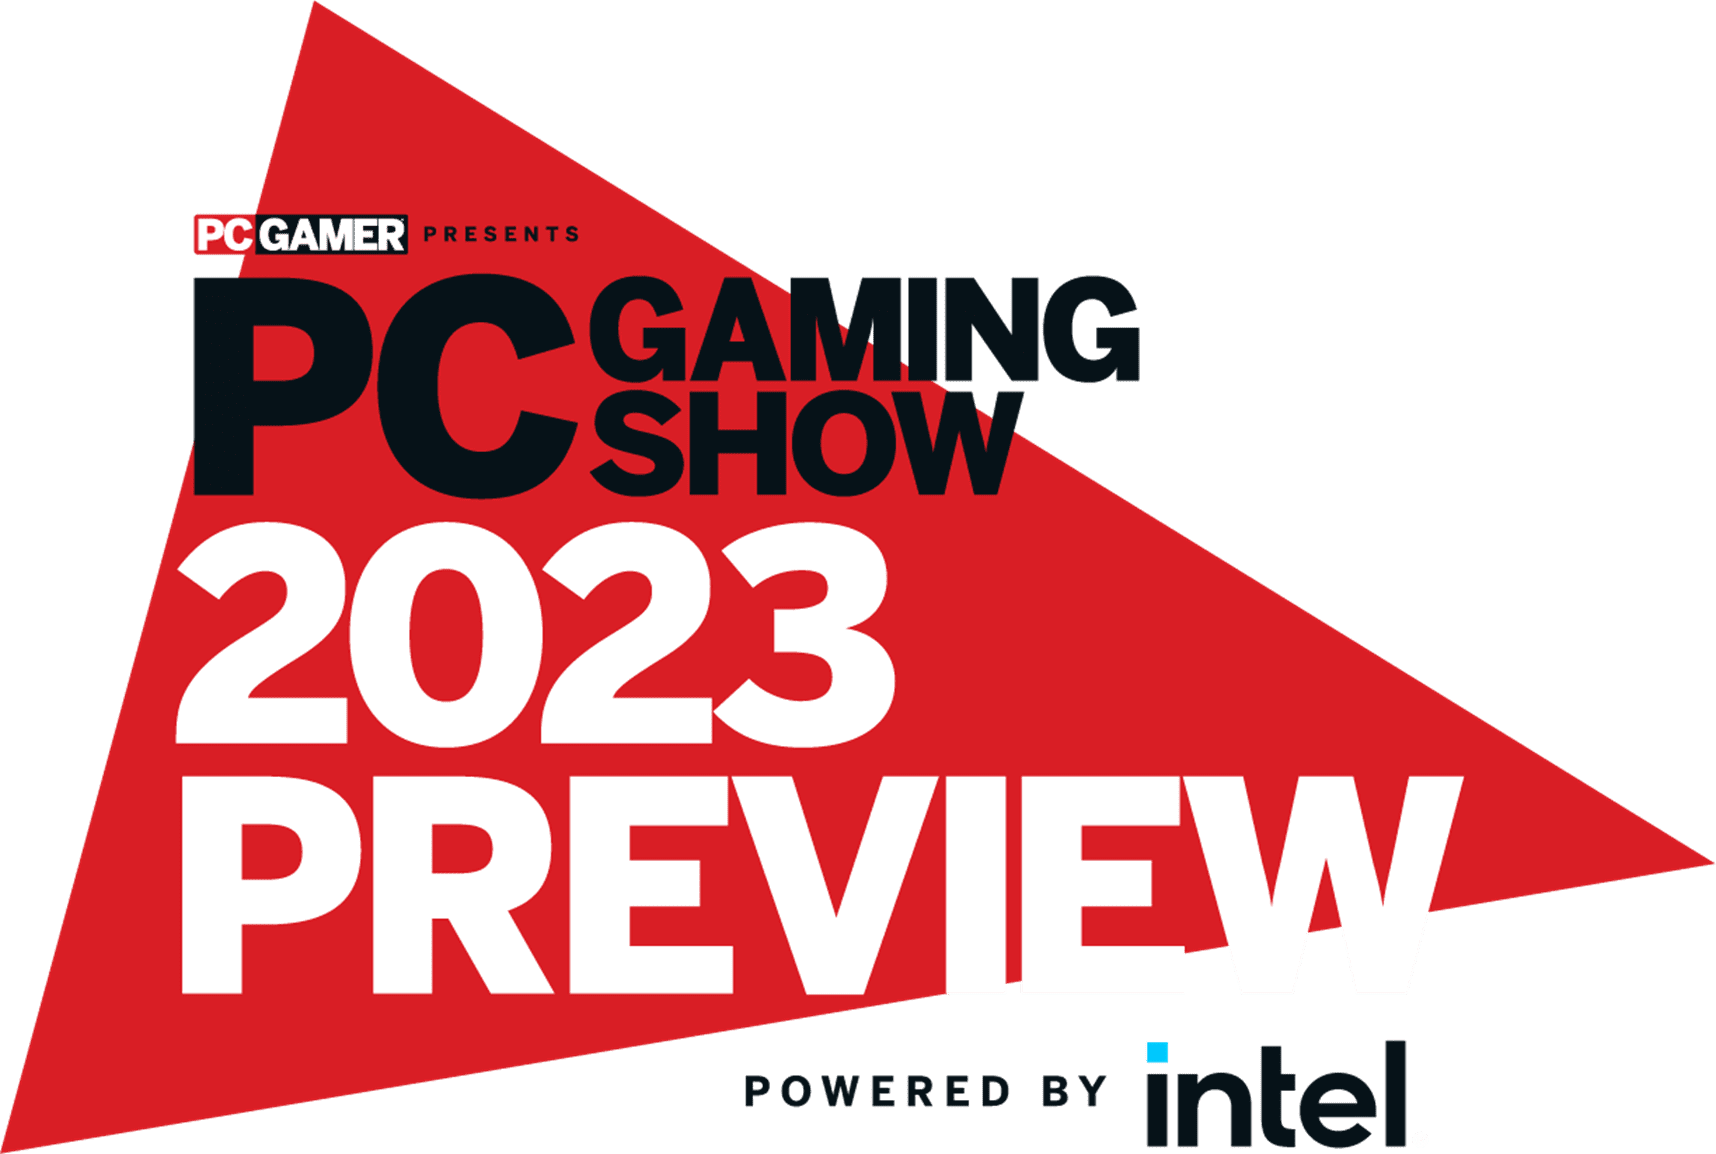 “PC Gaming Show 2023 Preview” Coming Nov. 17 Hardcore Gamers Unified